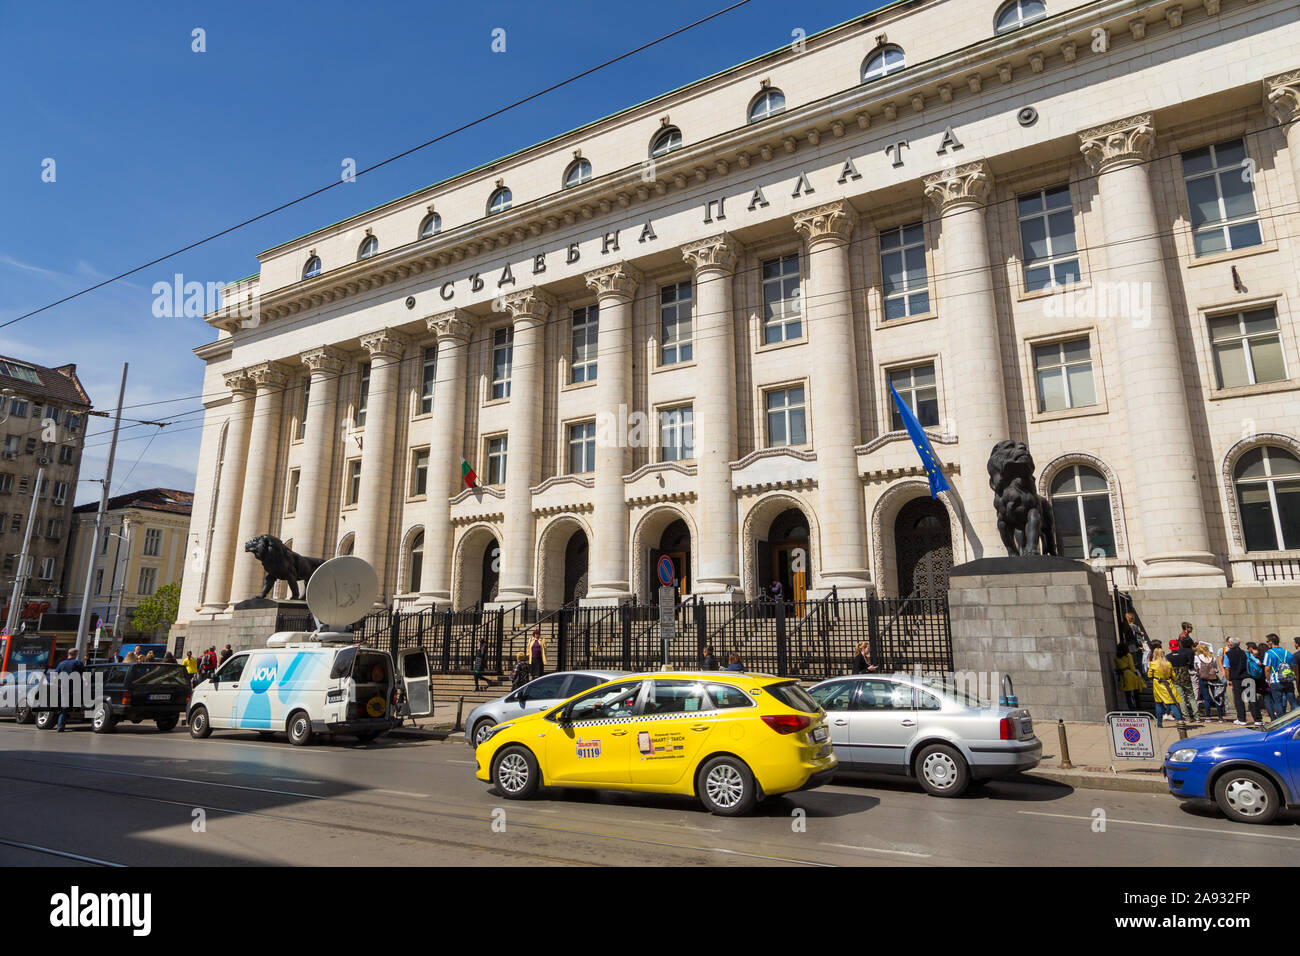 Sofia, Bulgaria- 30 April: View of the Sofia Court House. Monumental building with lion statues at the entrance located on 2 Vitosha Boulevard. Stock Photo